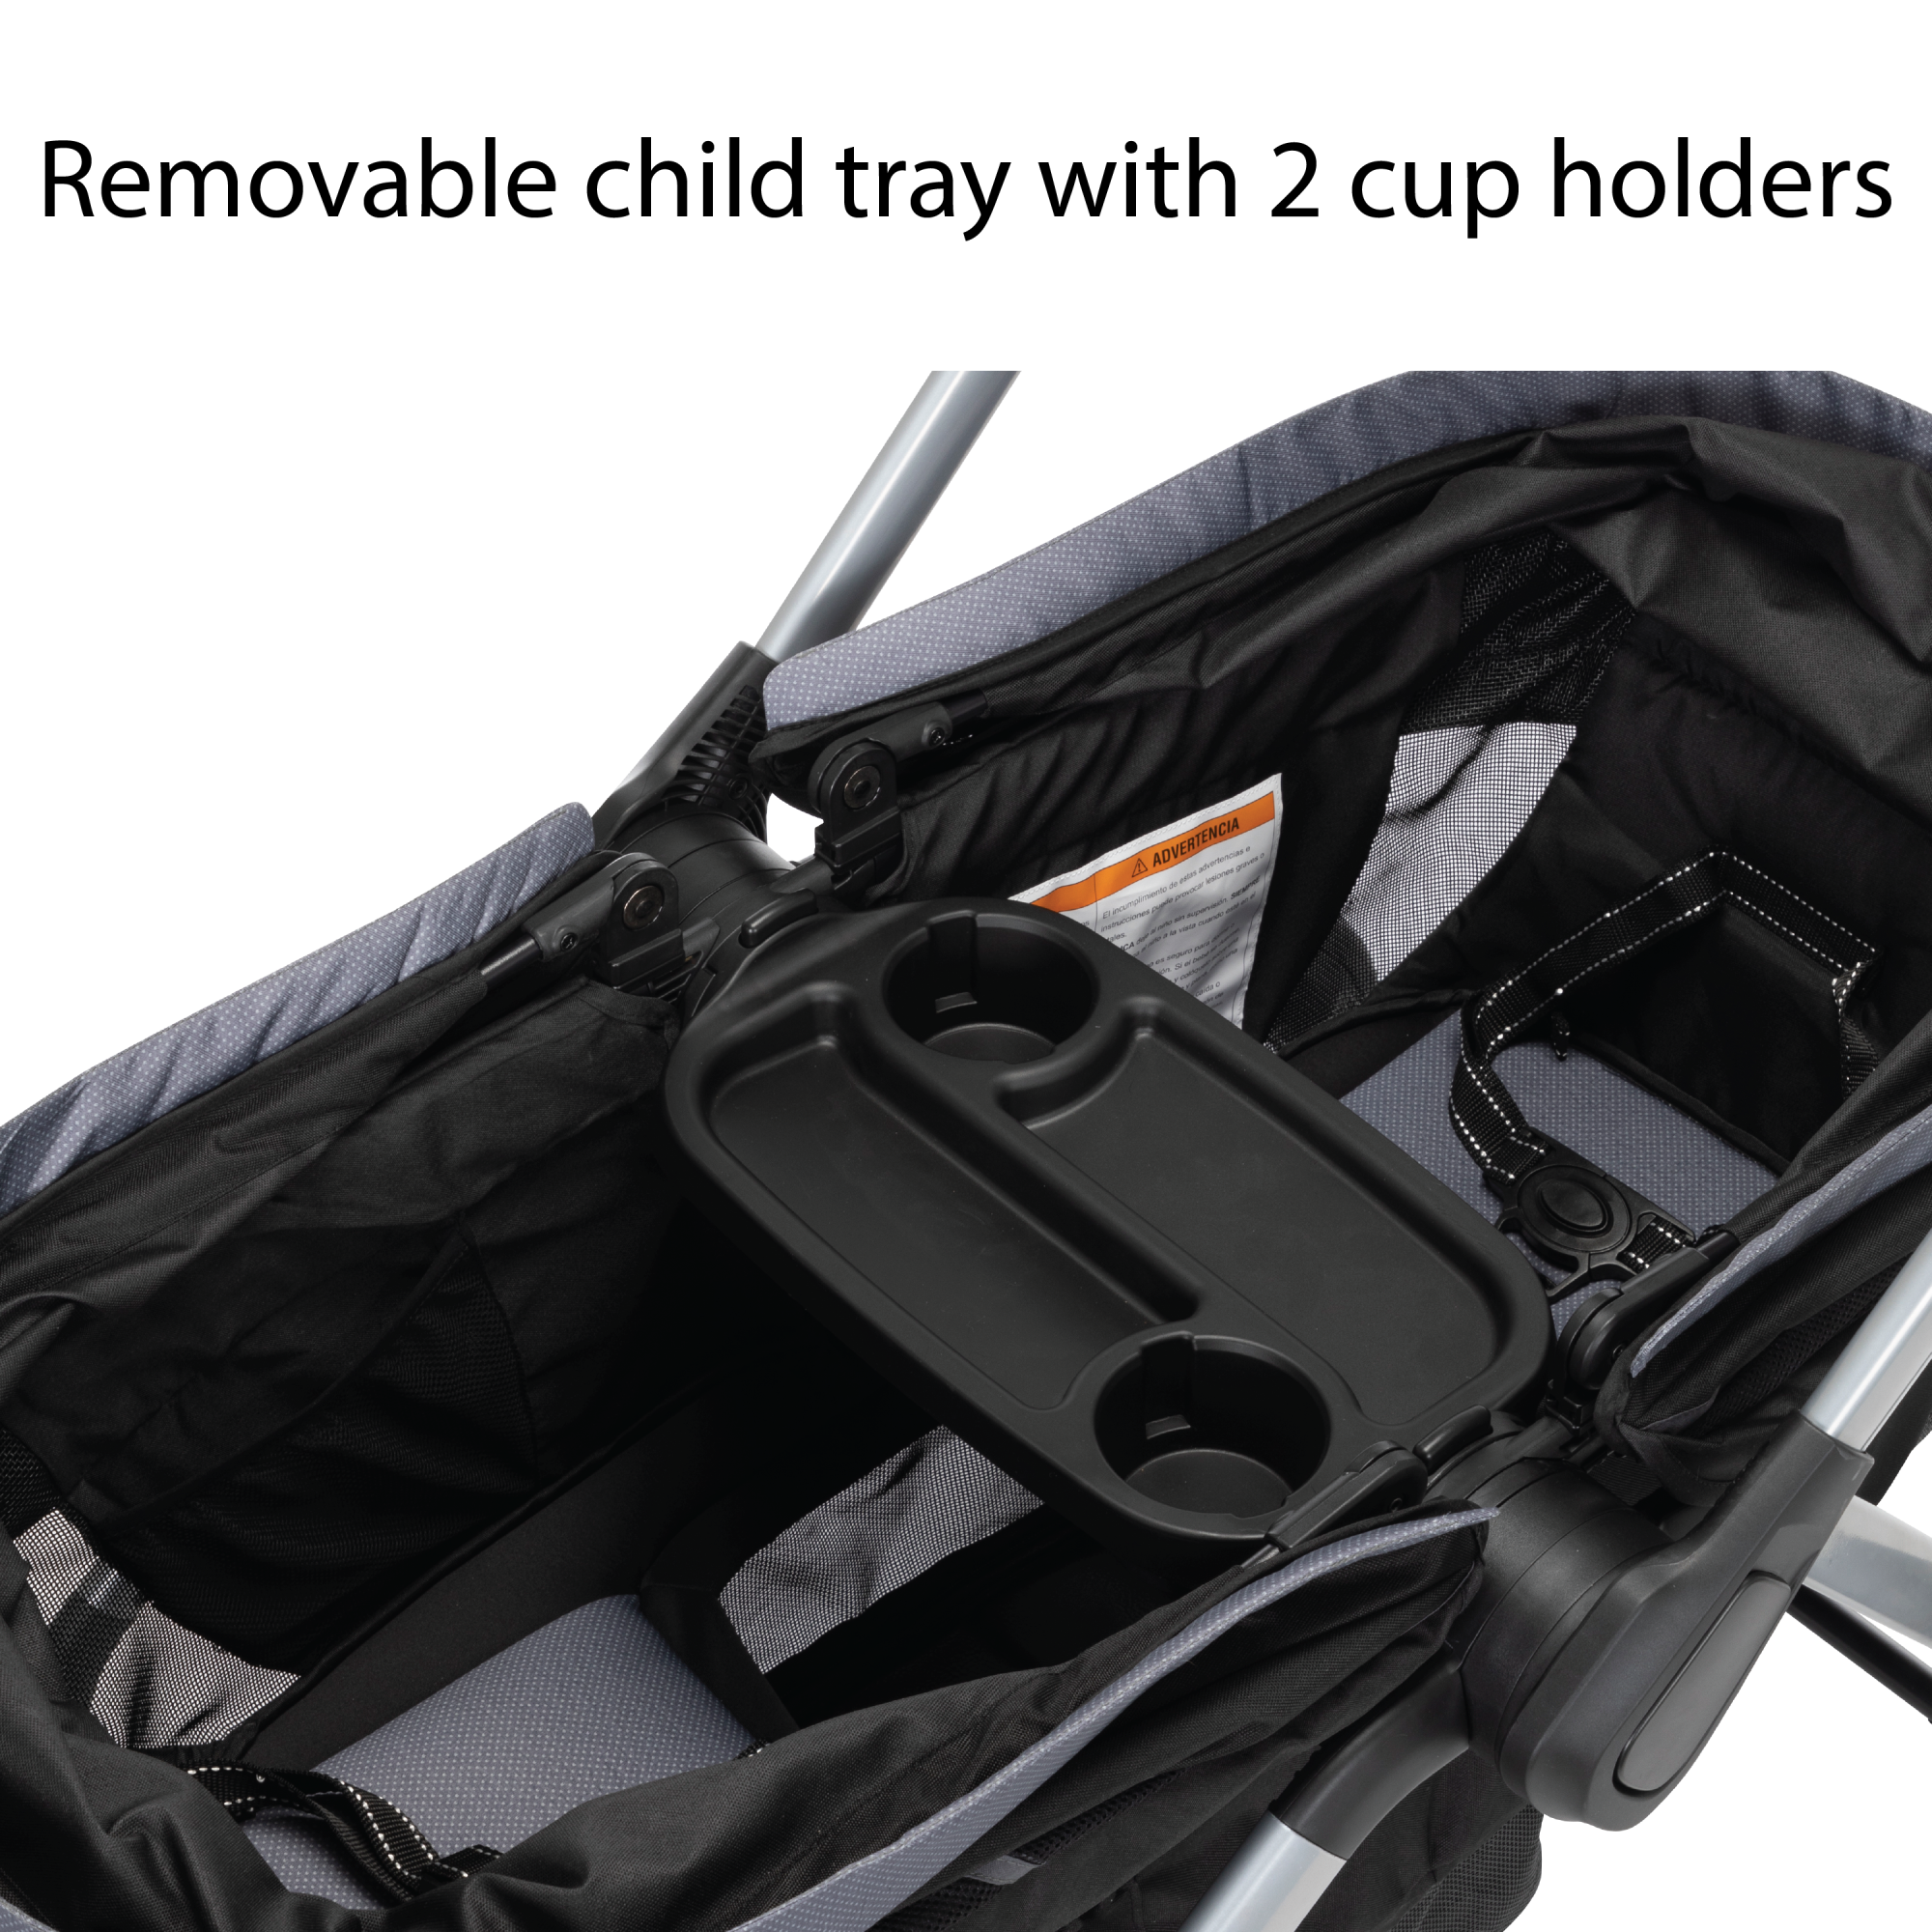 Summit Wagon Stroller - fits 2 kids up to 55 lbs. each